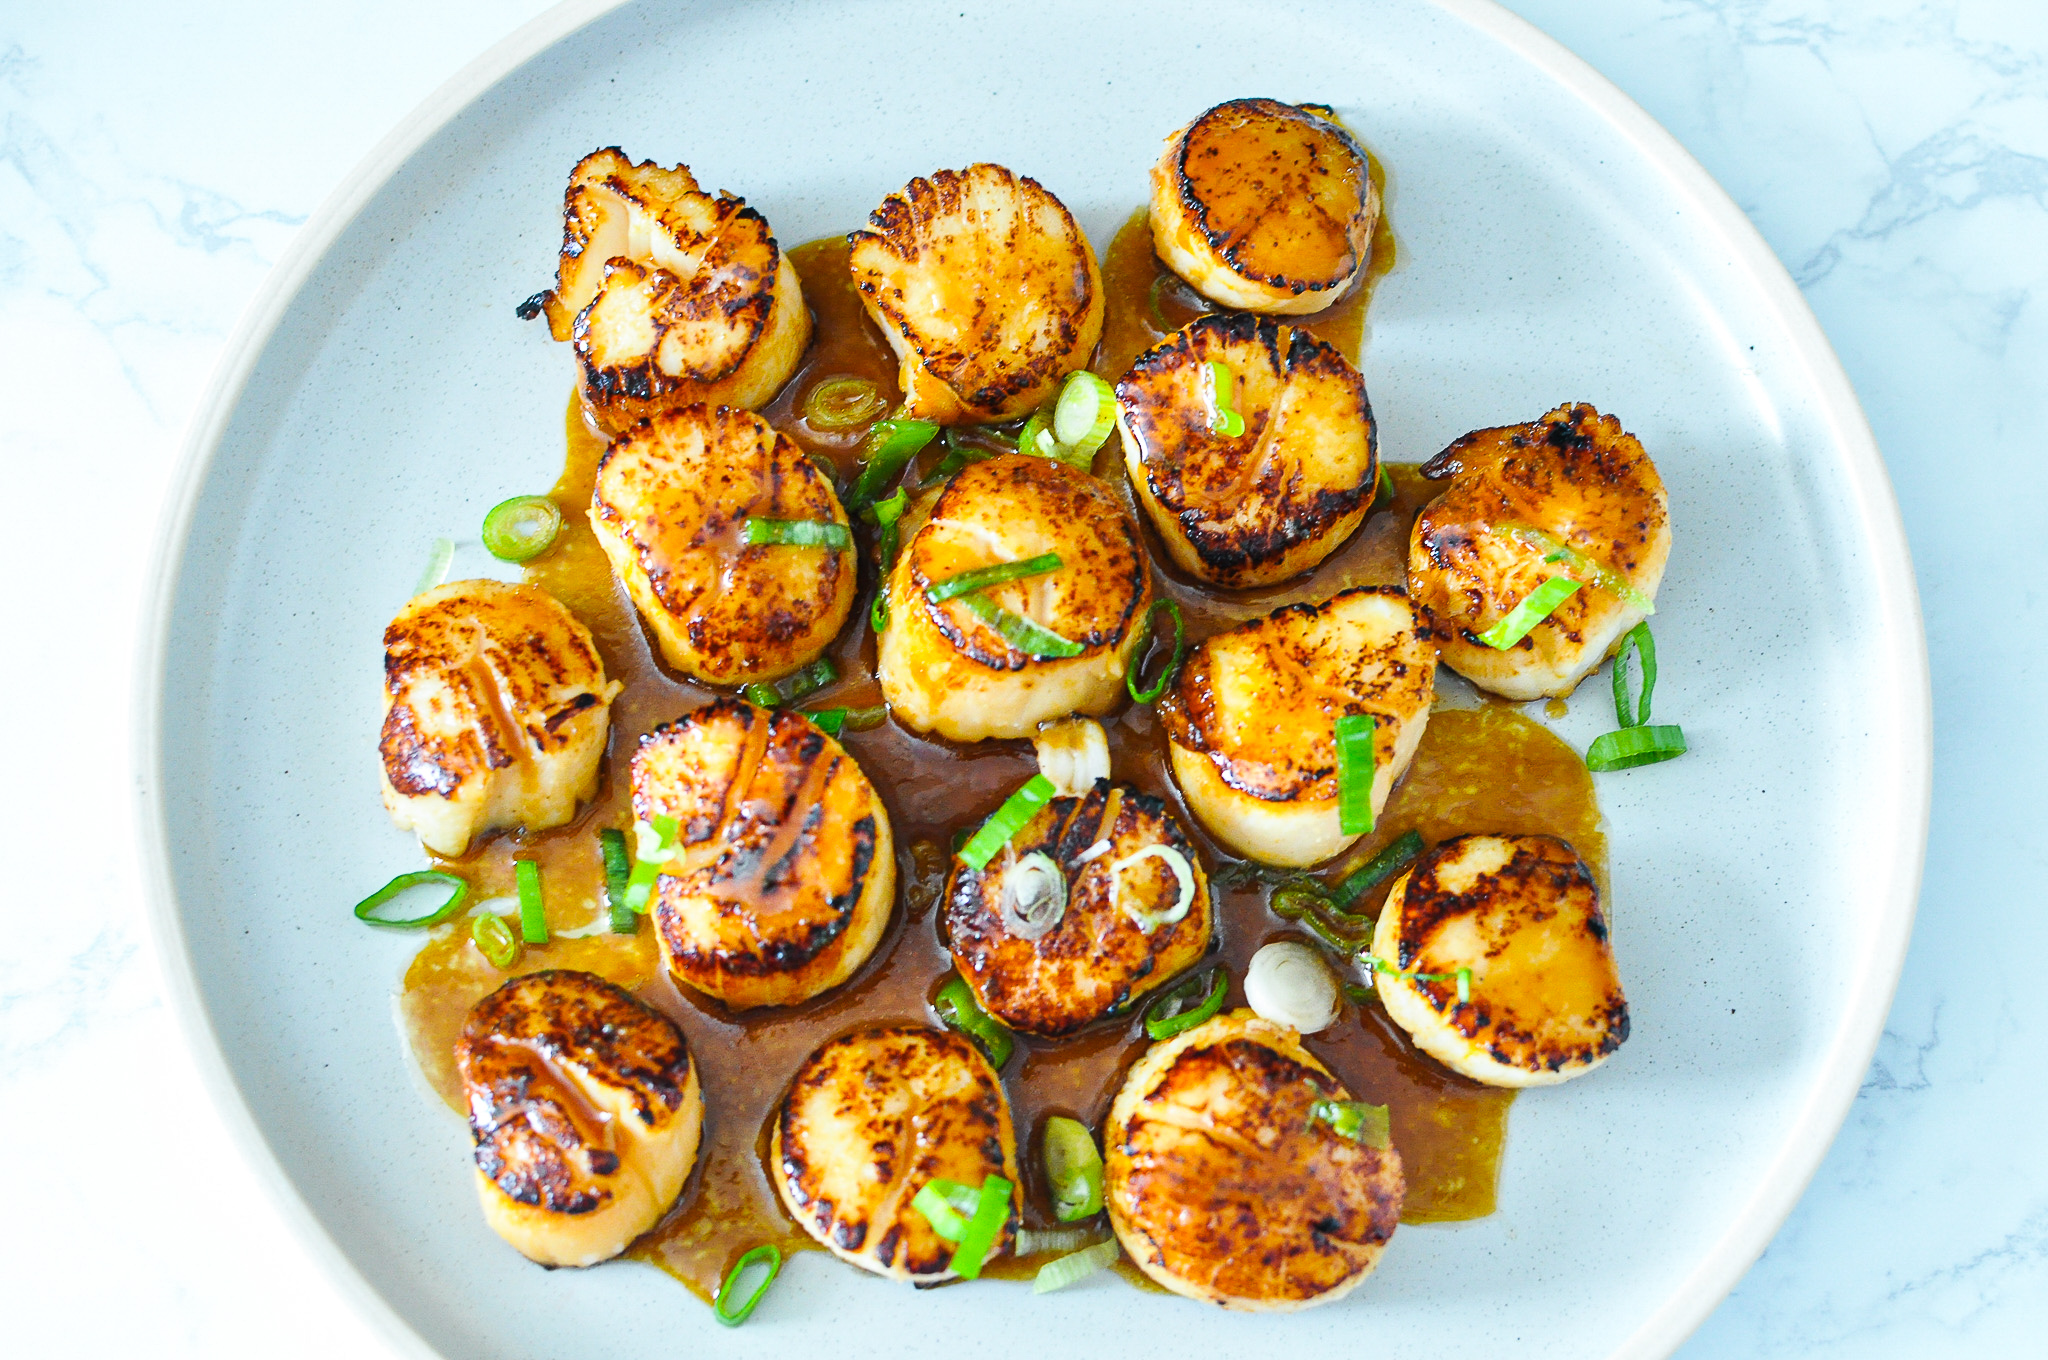 Paleo Orange Glazed Scallops (Become a Member for Access)